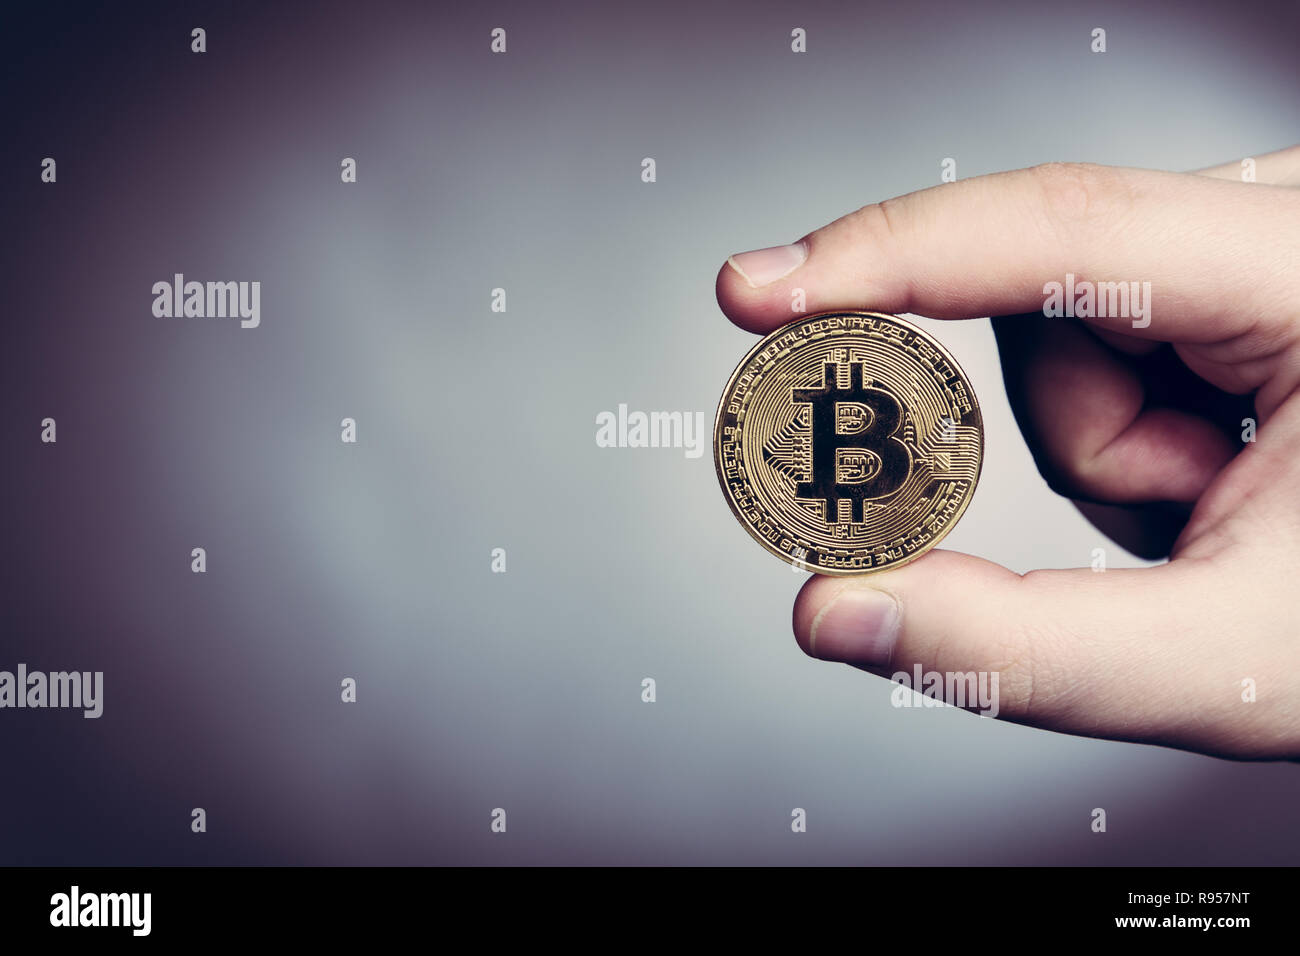 Bitcoin cryptocurrency gold coin in man's hand Stock Photo